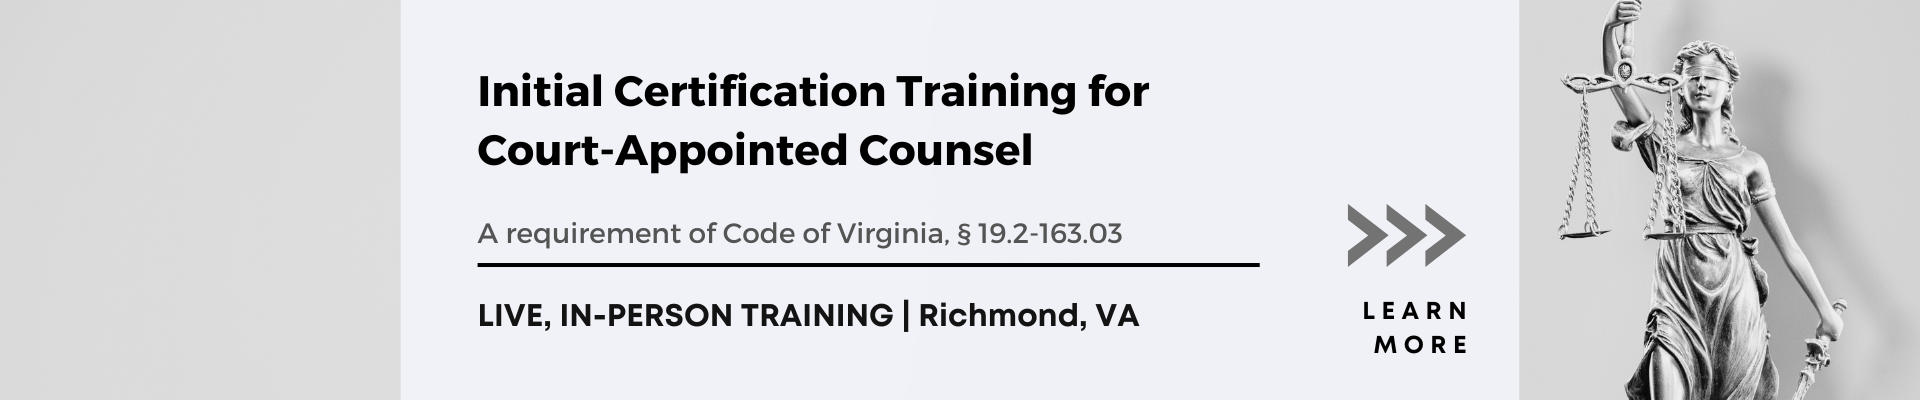 Initial Certification Training for Court-Appointed Counsel